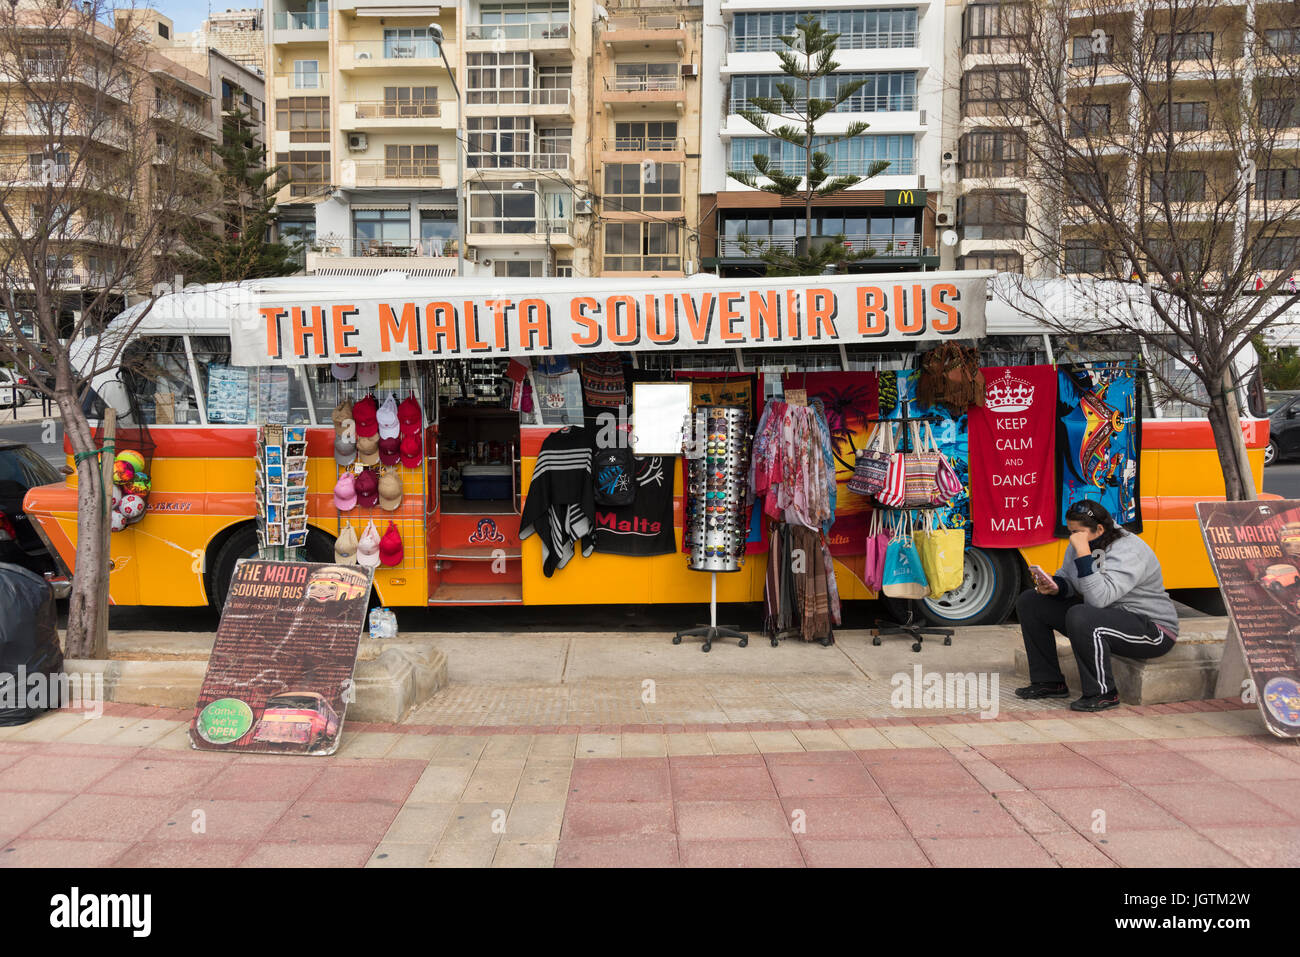 The Malta souvenir bus, a bus converted into a shop selling tourist gifts and souvenirs in Valetta Malta Stock Photo